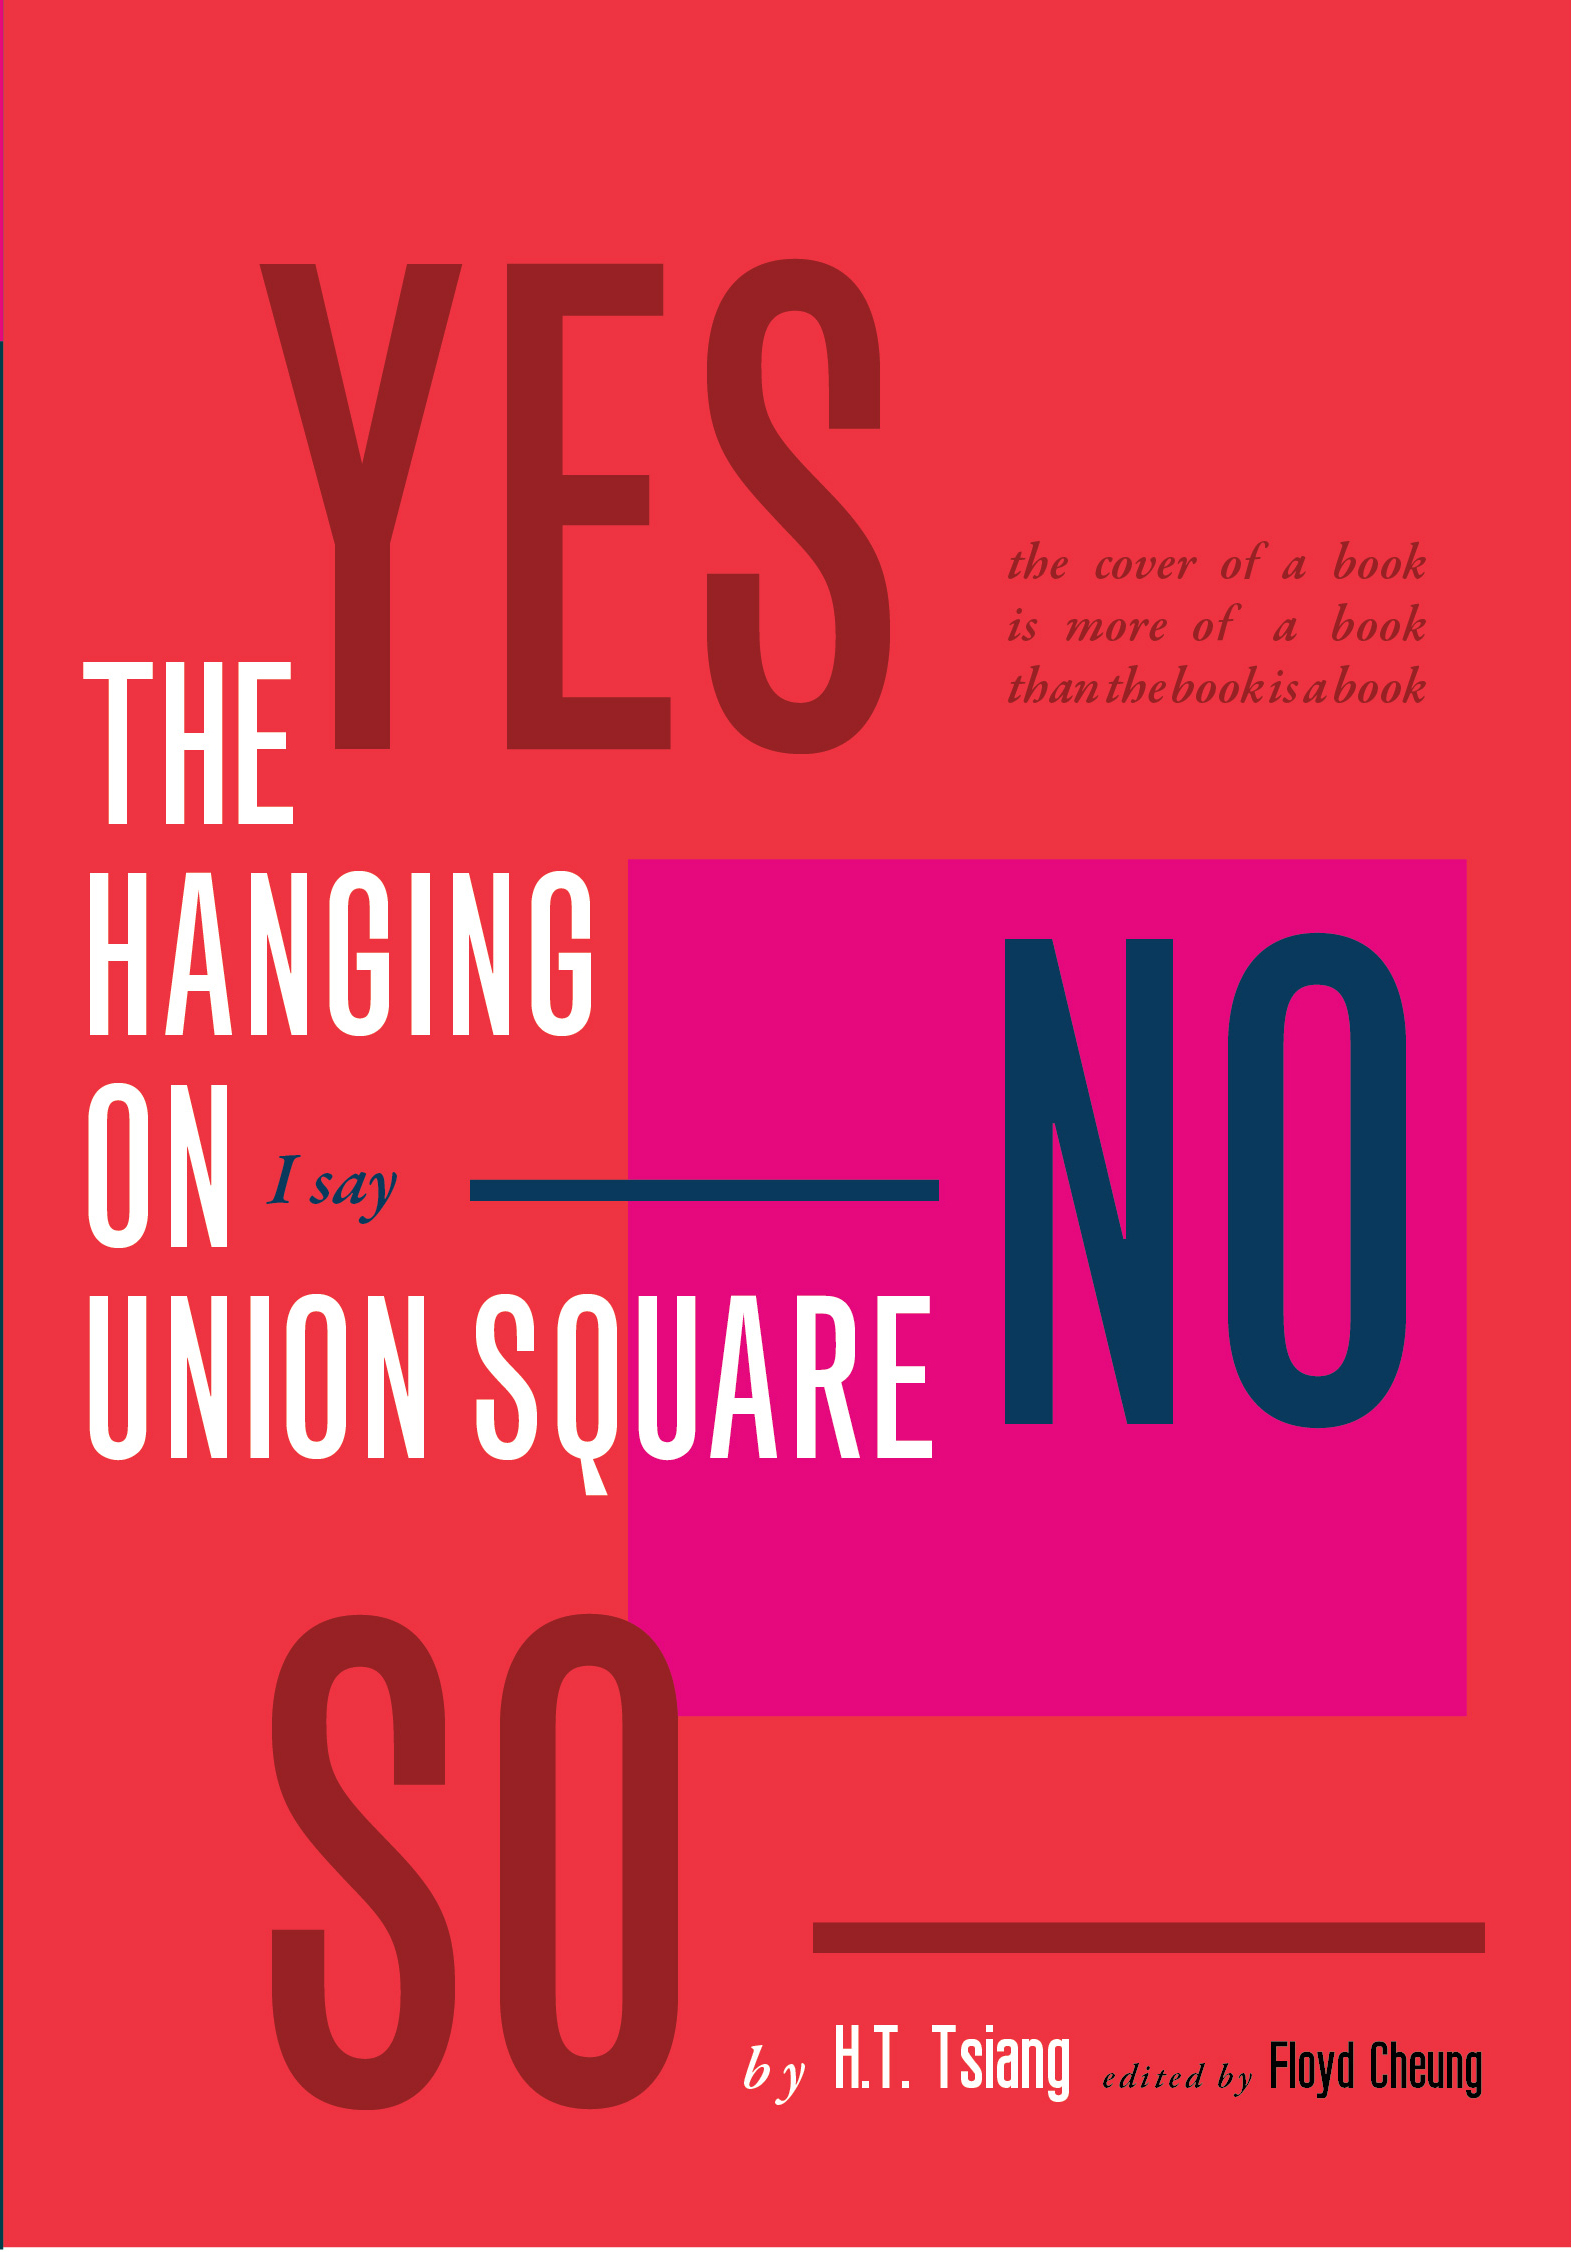 The Hanging on Union Square H.T. Tsiang and Floyd Cheung